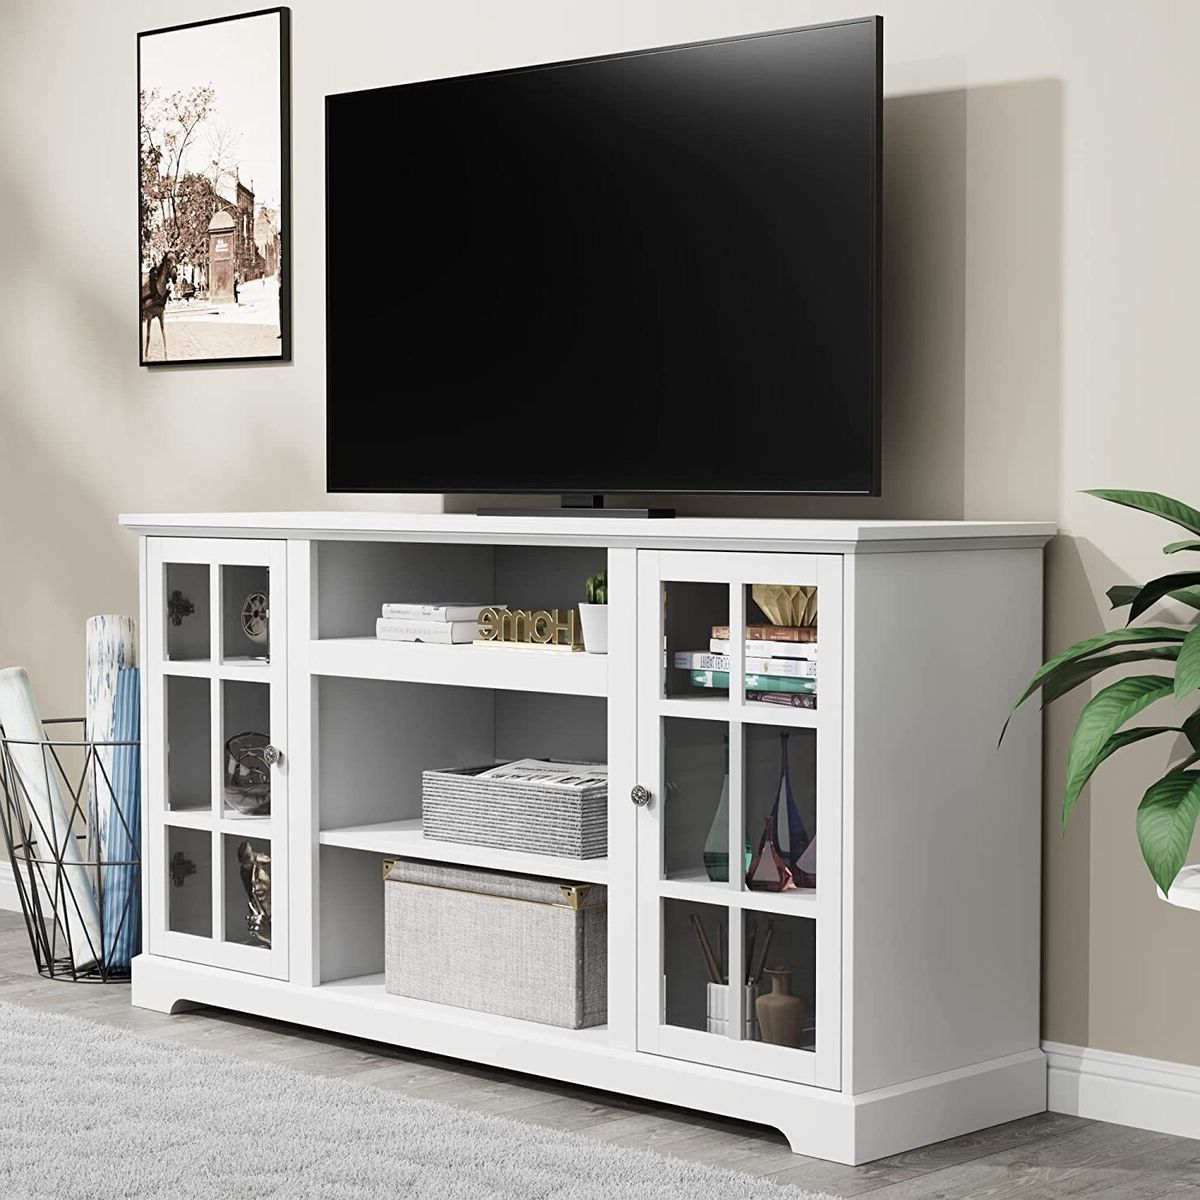 Modern Farmhouse Tv Stand For 65 Inch Tv Entertainment Center Storage  Cabinets | Ebay With Farmhouse Stands With Shelves (Gallery 4 of 20)